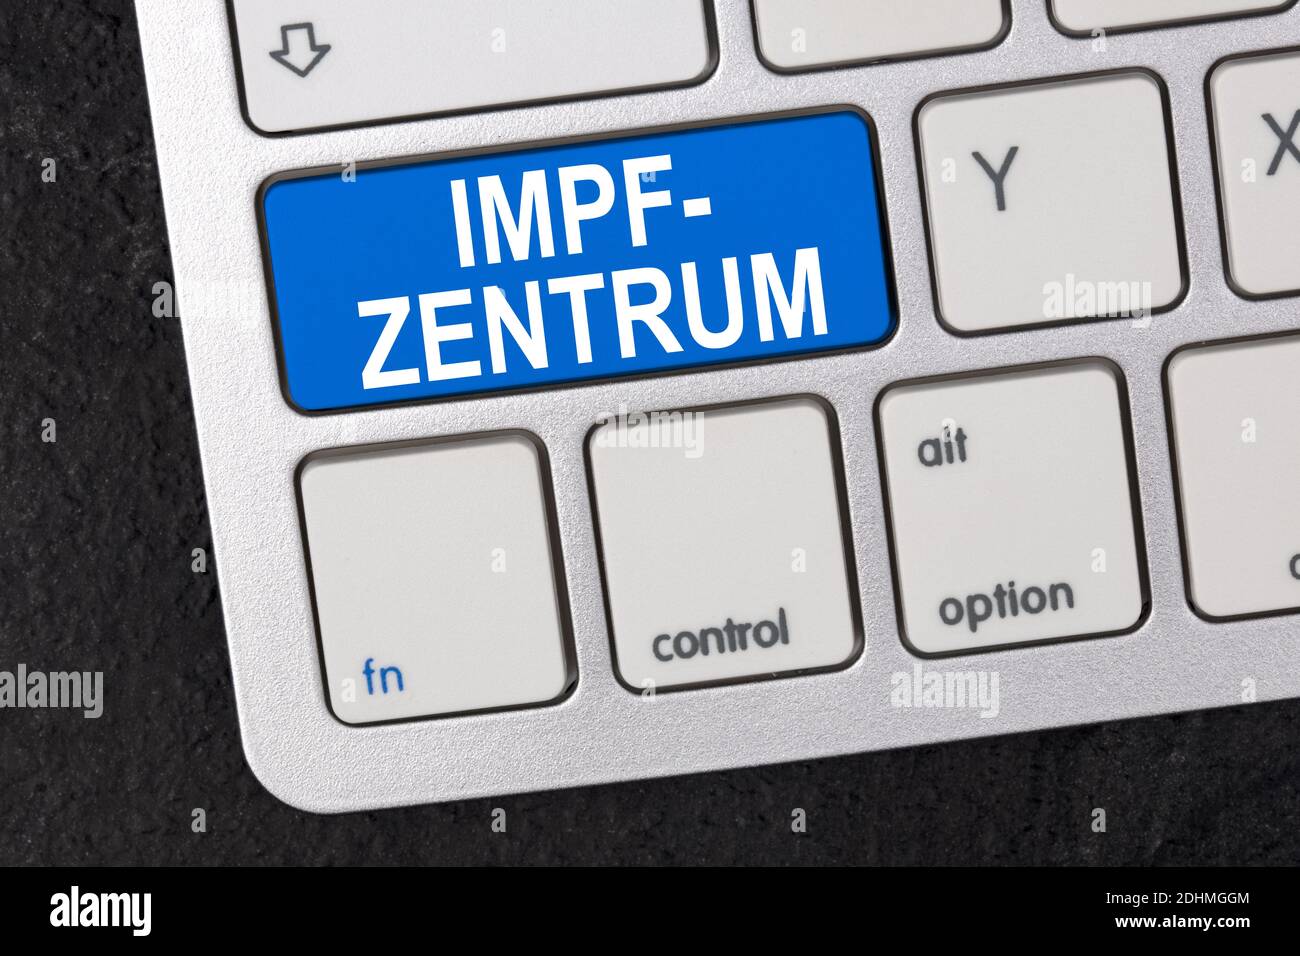 Concept: Impfzentrum in german language means - Vaccination center on a Keyboard on dark background Stock Photo